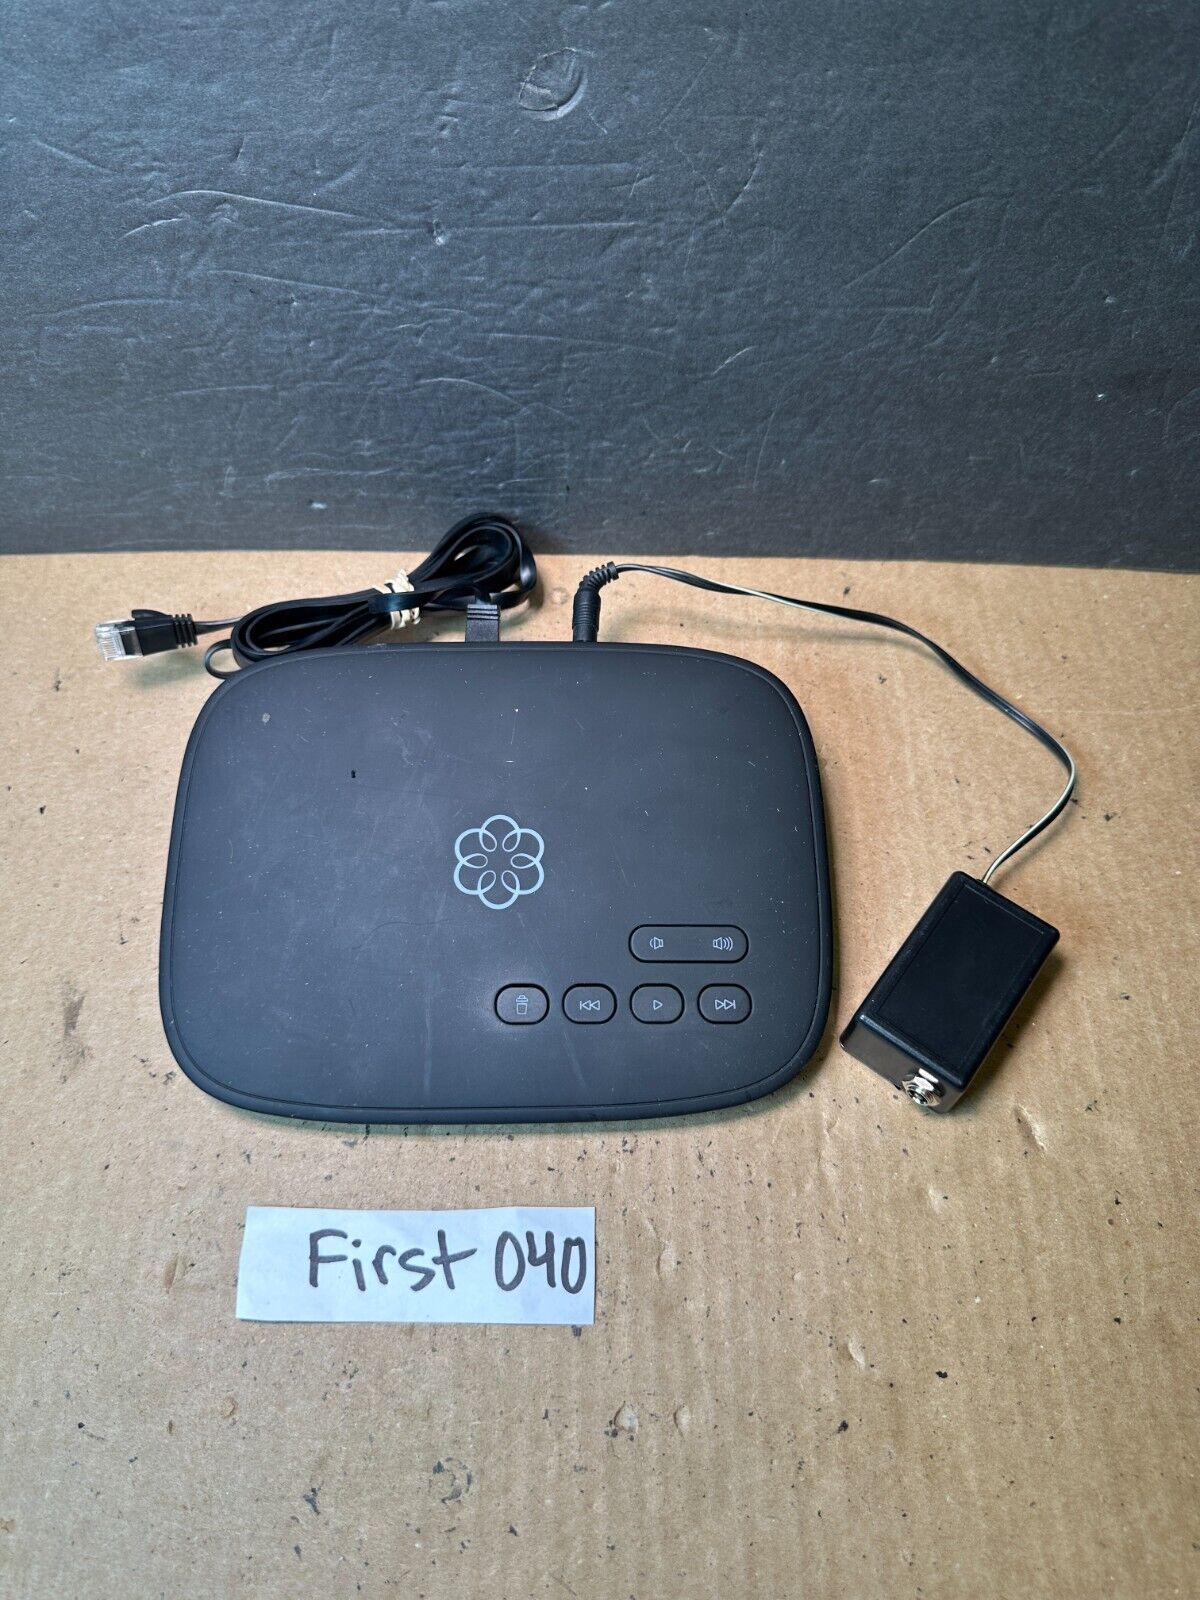 Ooma Telo Free Home Phone Service VoIP Phone - Black Works Ships Fast